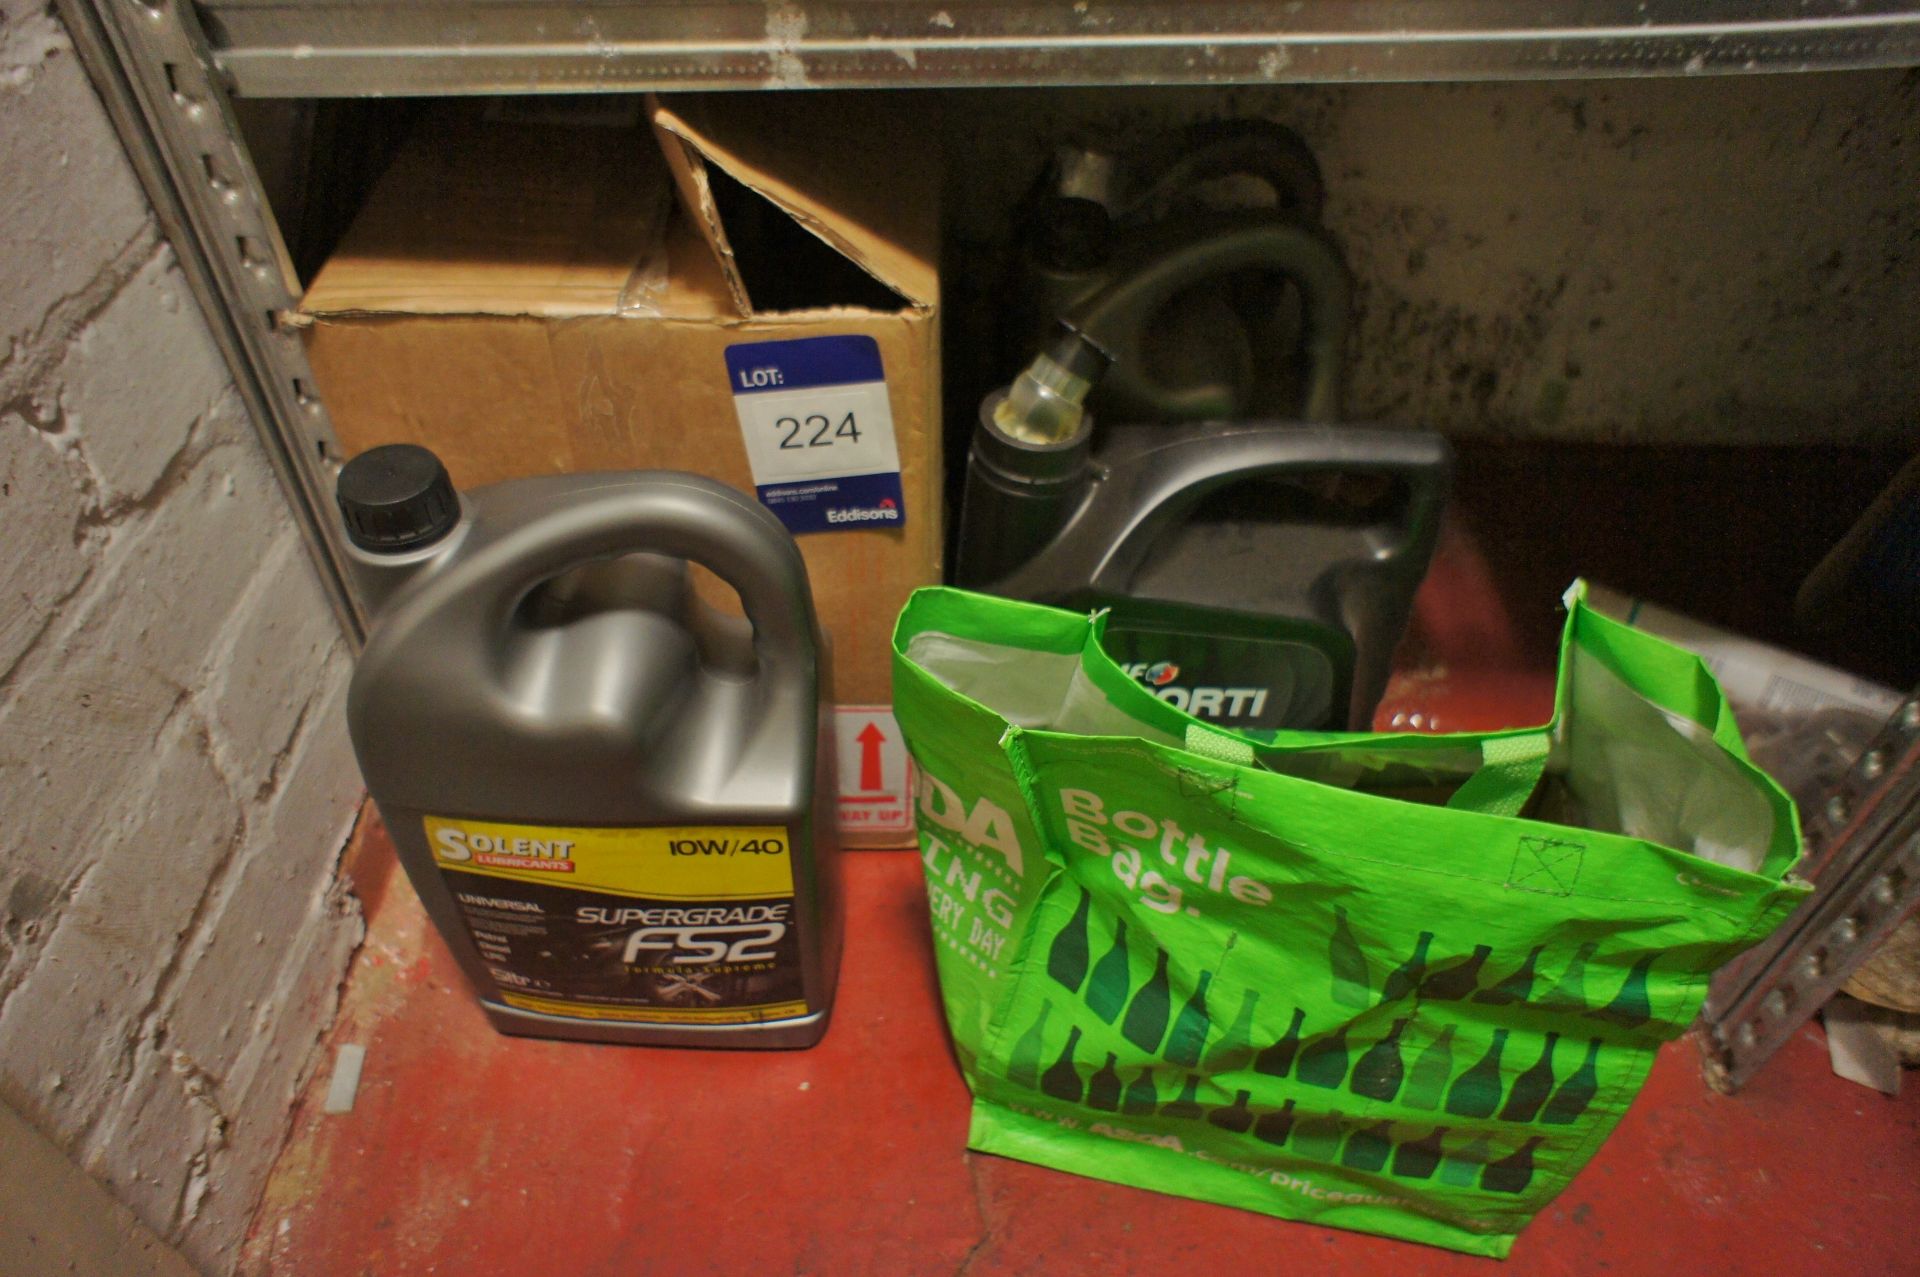 4 Solvent 10w/40 5Litre engine oil and 5 Redex Die